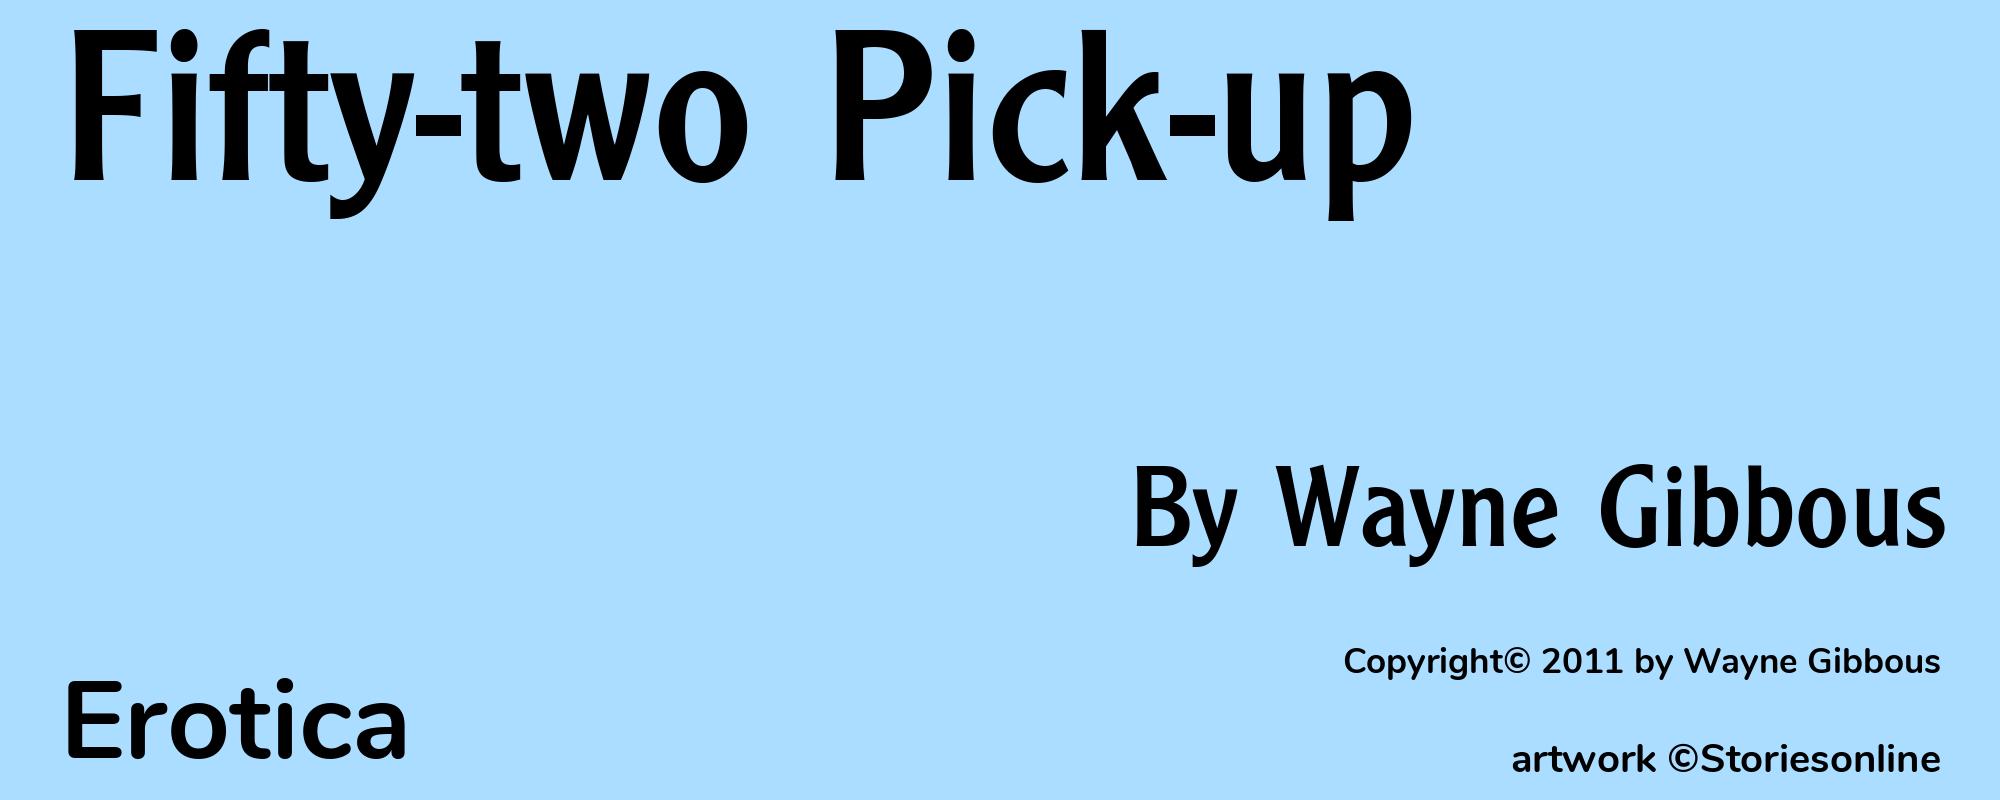 Fifty-two Pick-up - Cover